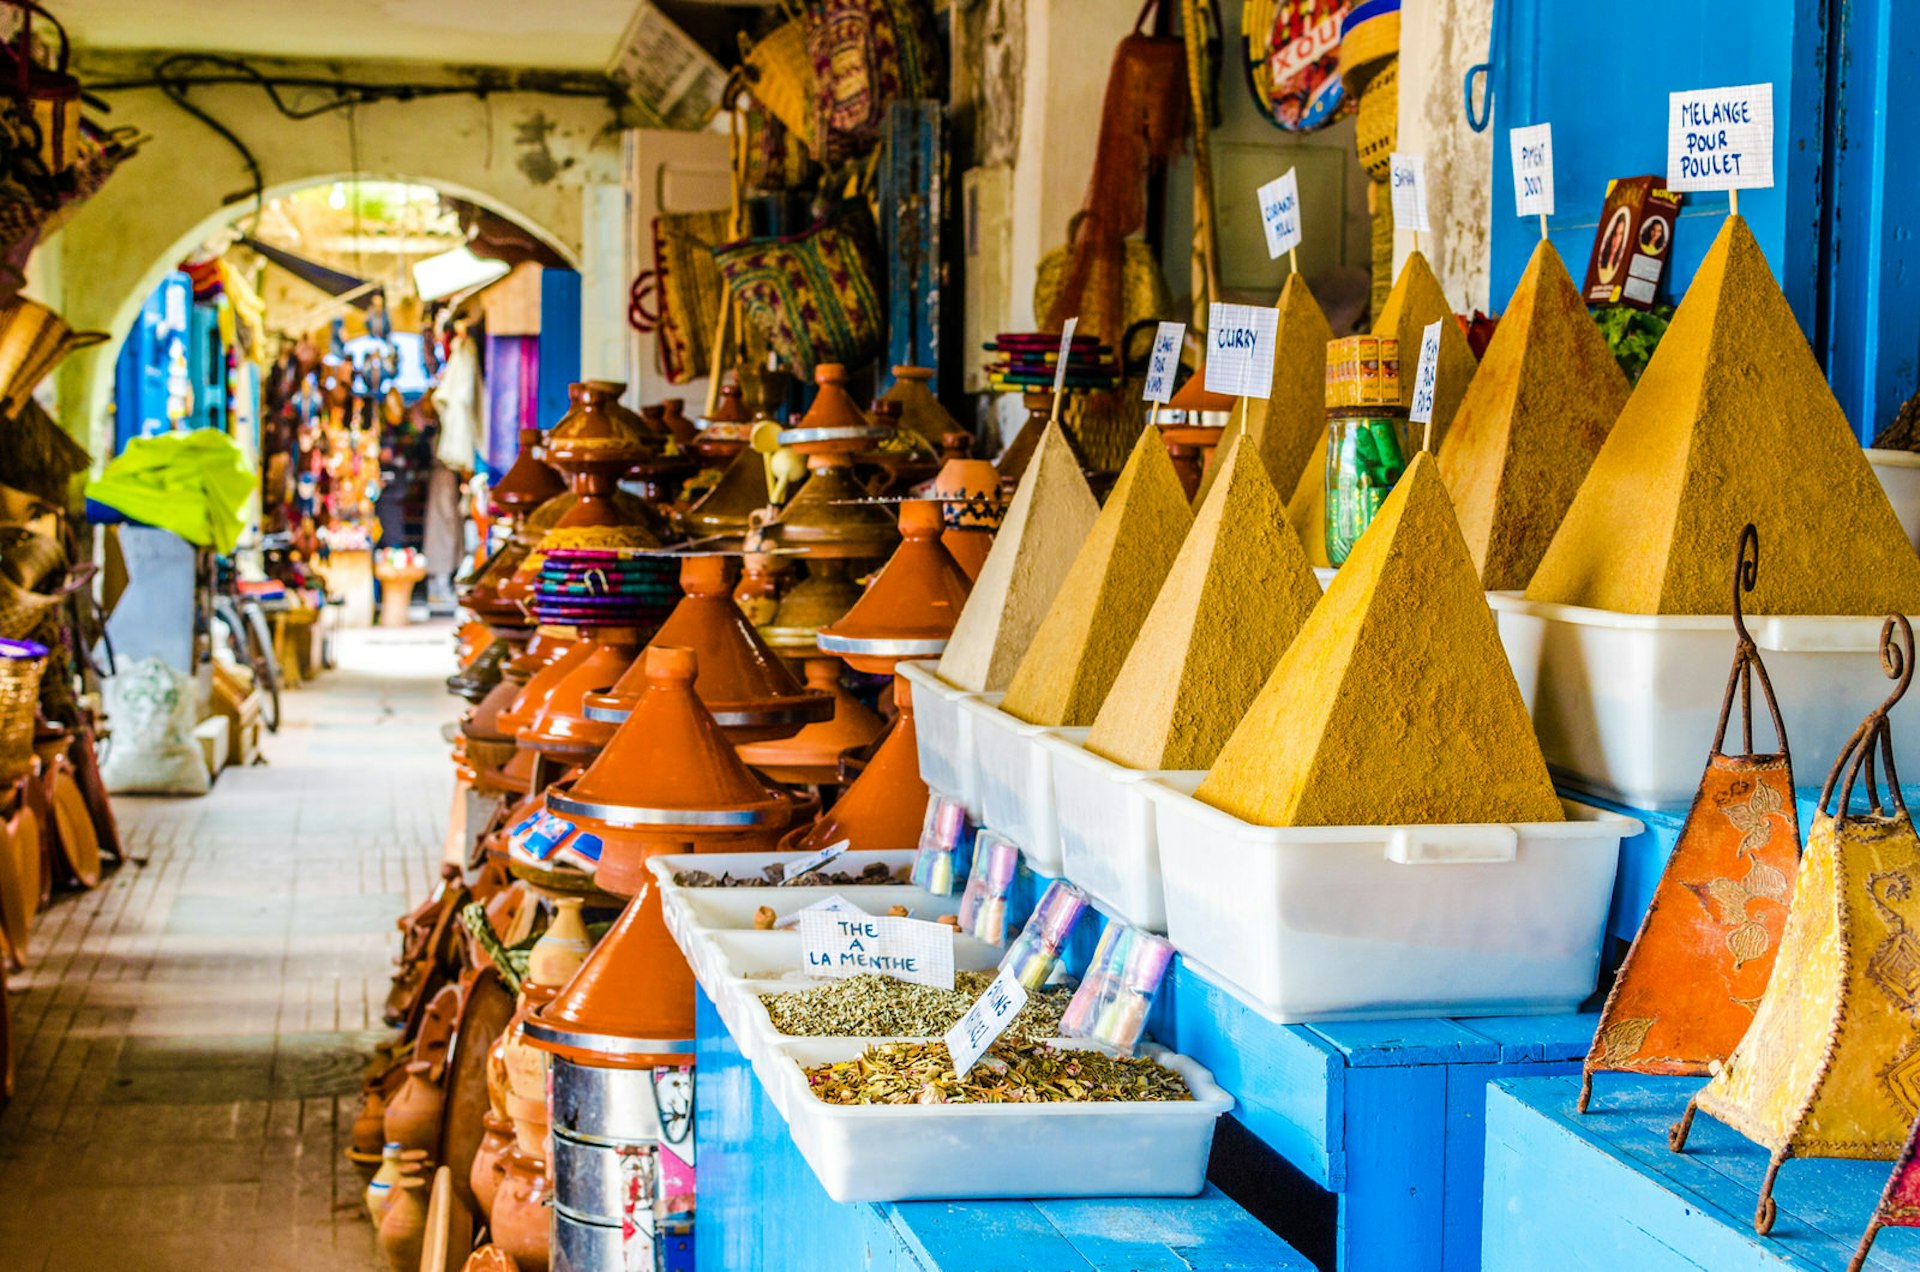 Pyramids of spices, Essaouira, Morocco. Image by Federica Gentile / Getty Images